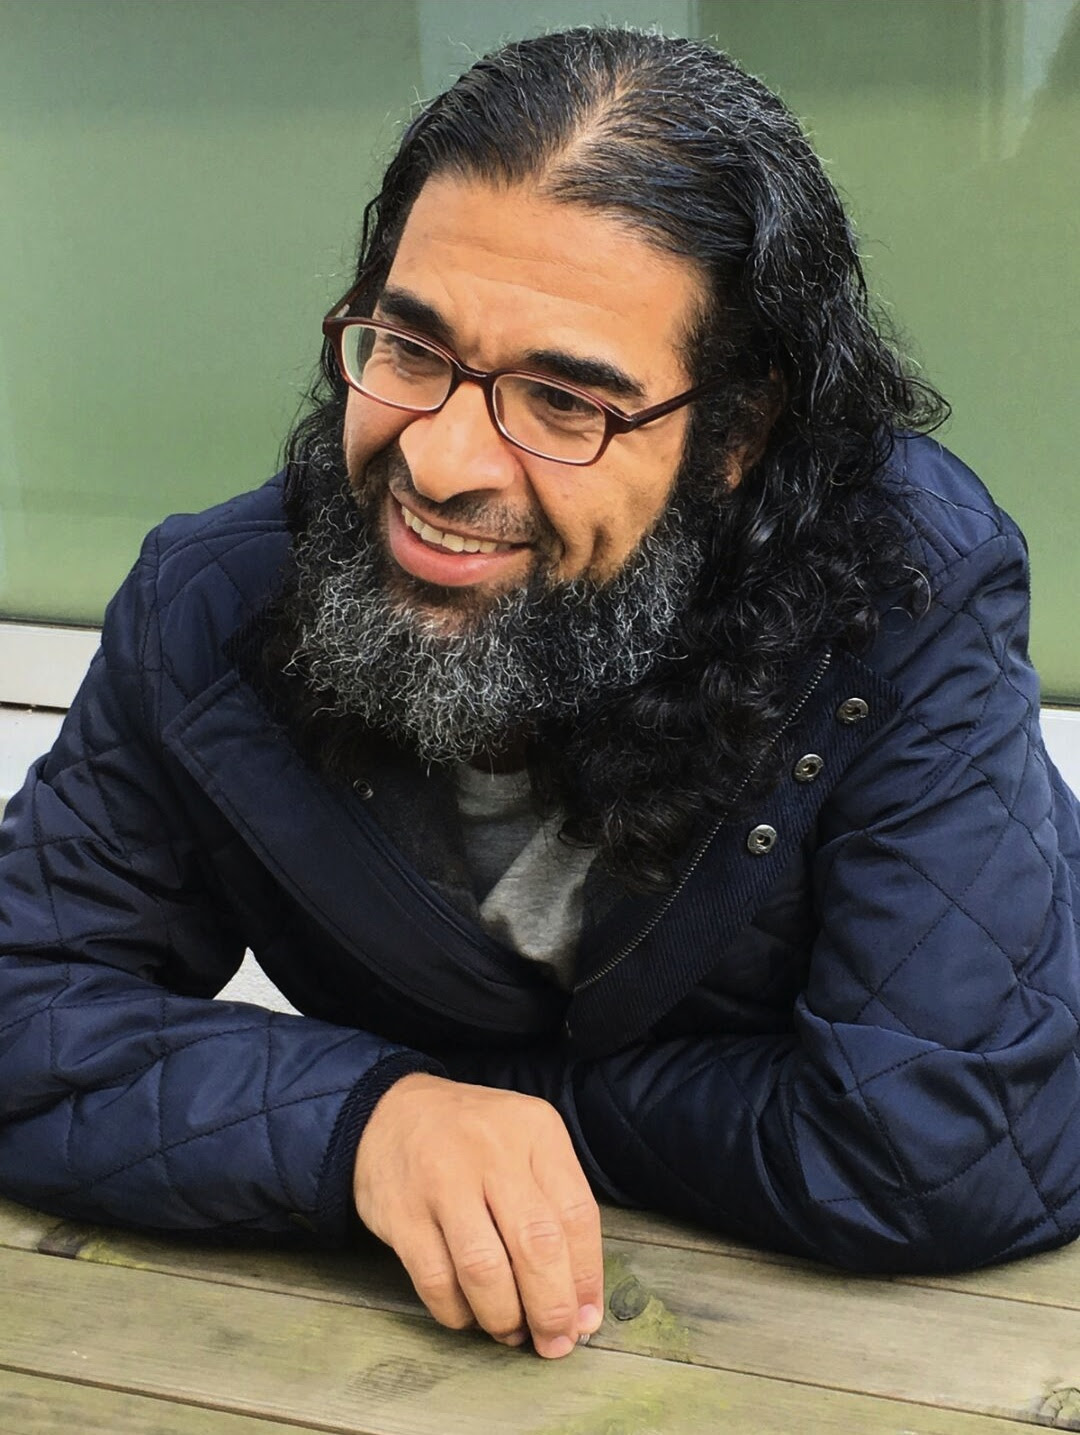 A photo that Shaker Aamer made available to the We Stand With Shaker campaign to thanks all his supporters who worked so hard to secure his release from Guantanamo.